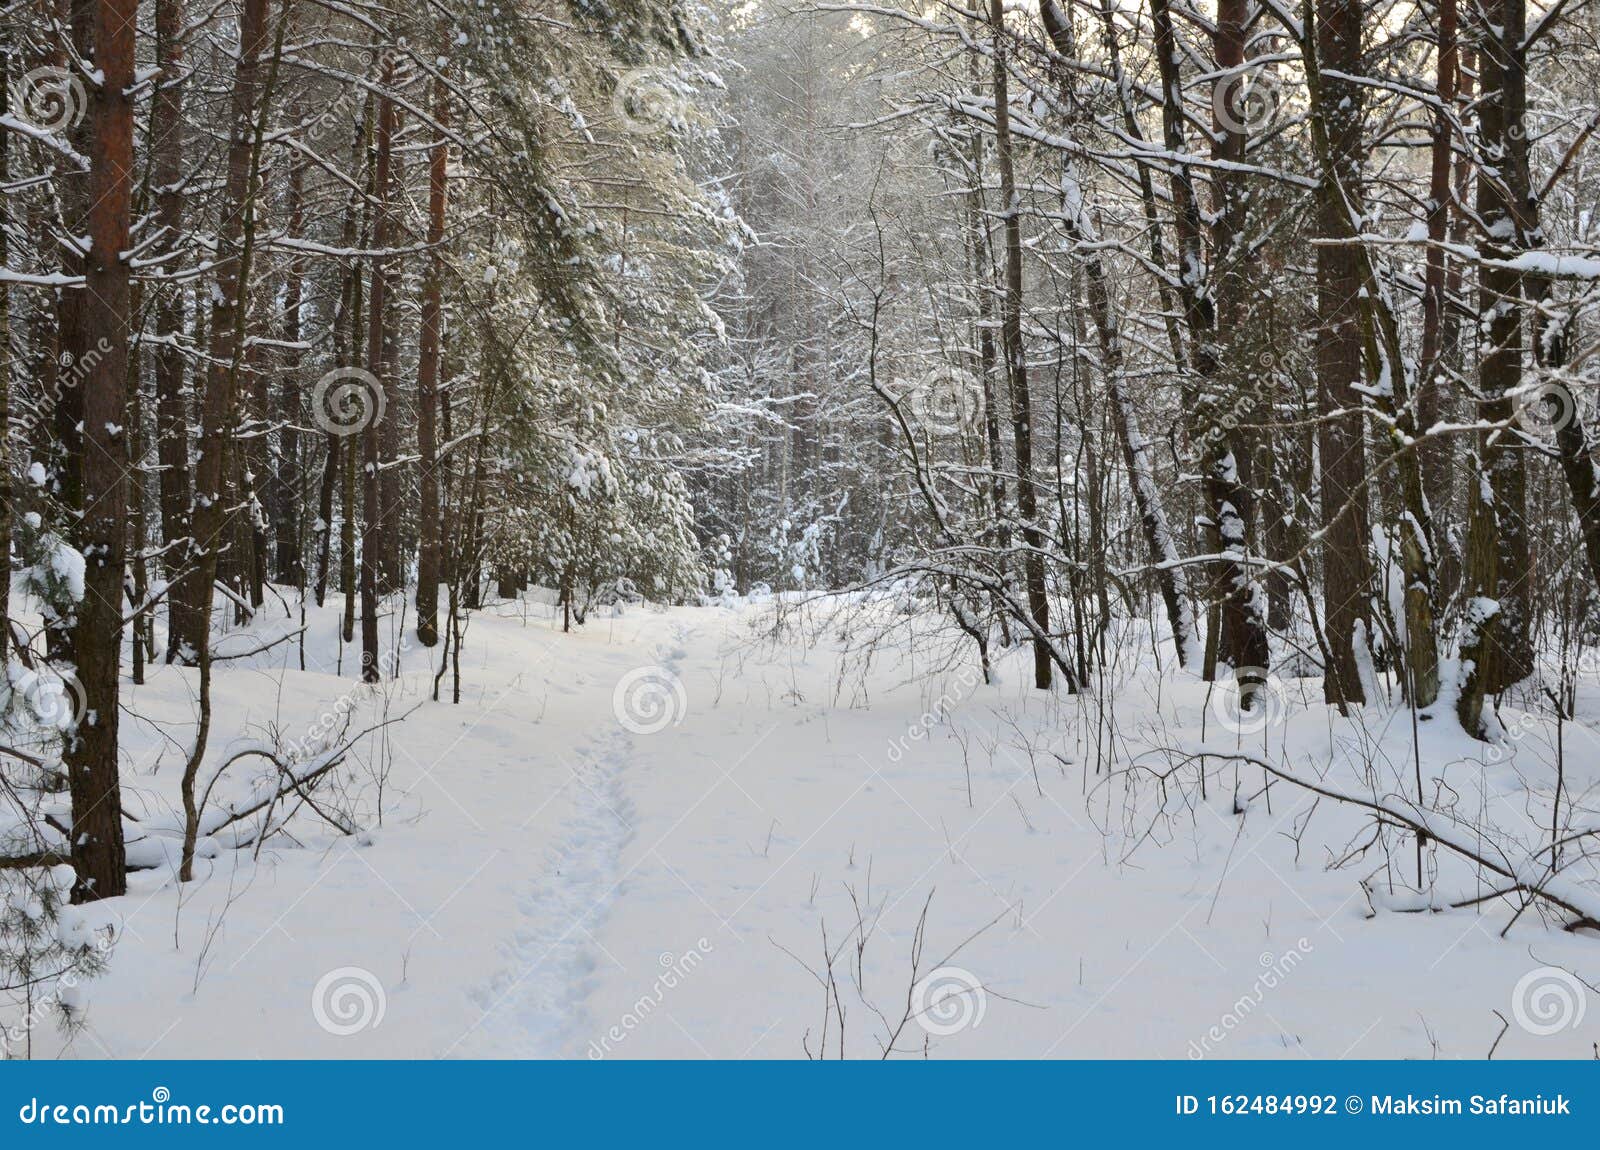 Awesome Winter Landscape. a Snow-covered Path among the Trees in the ...